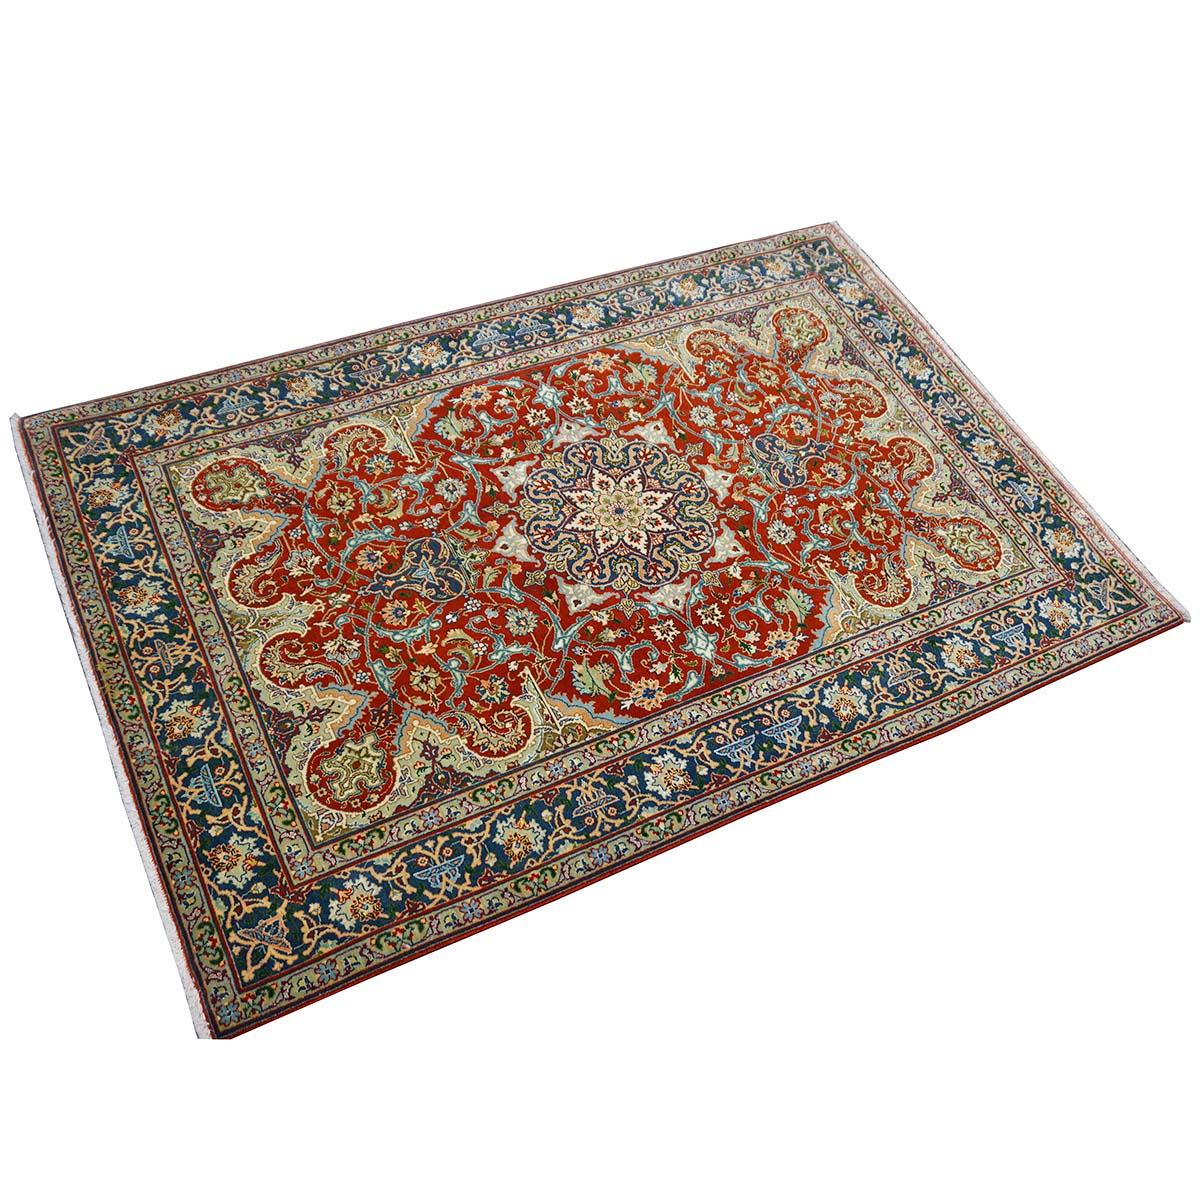 Hand-Woven Antique 1940s Fine Persian Tabriz 3x4 Red, Navy, & Blue Handmade Area Rug For Sale